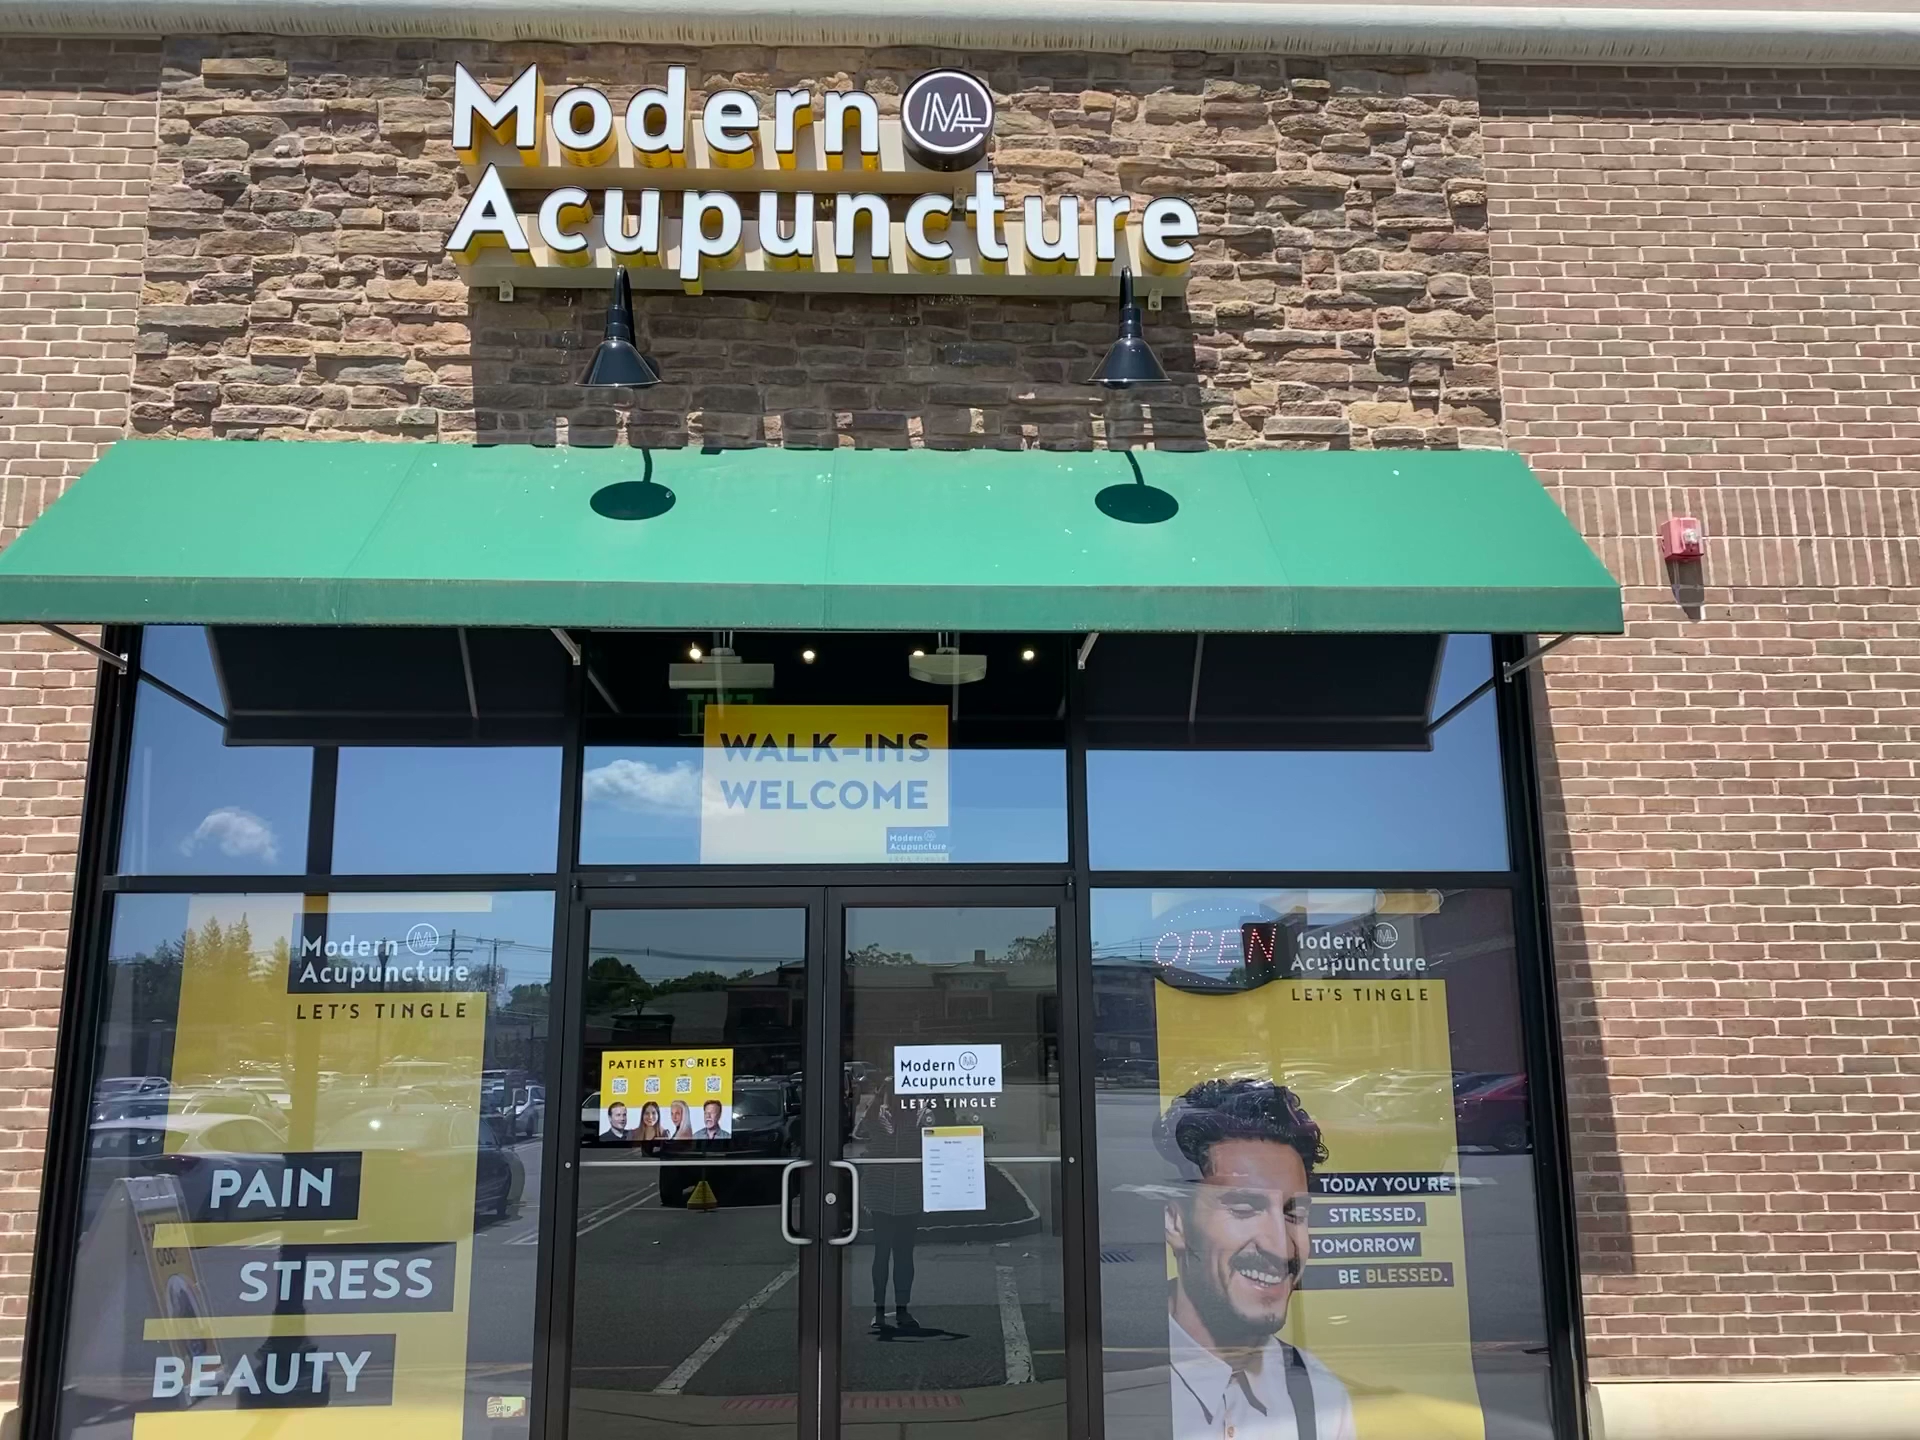 Modern Acupuncture 176 Columbia Turnpike, Florham Park New Jersey 07932